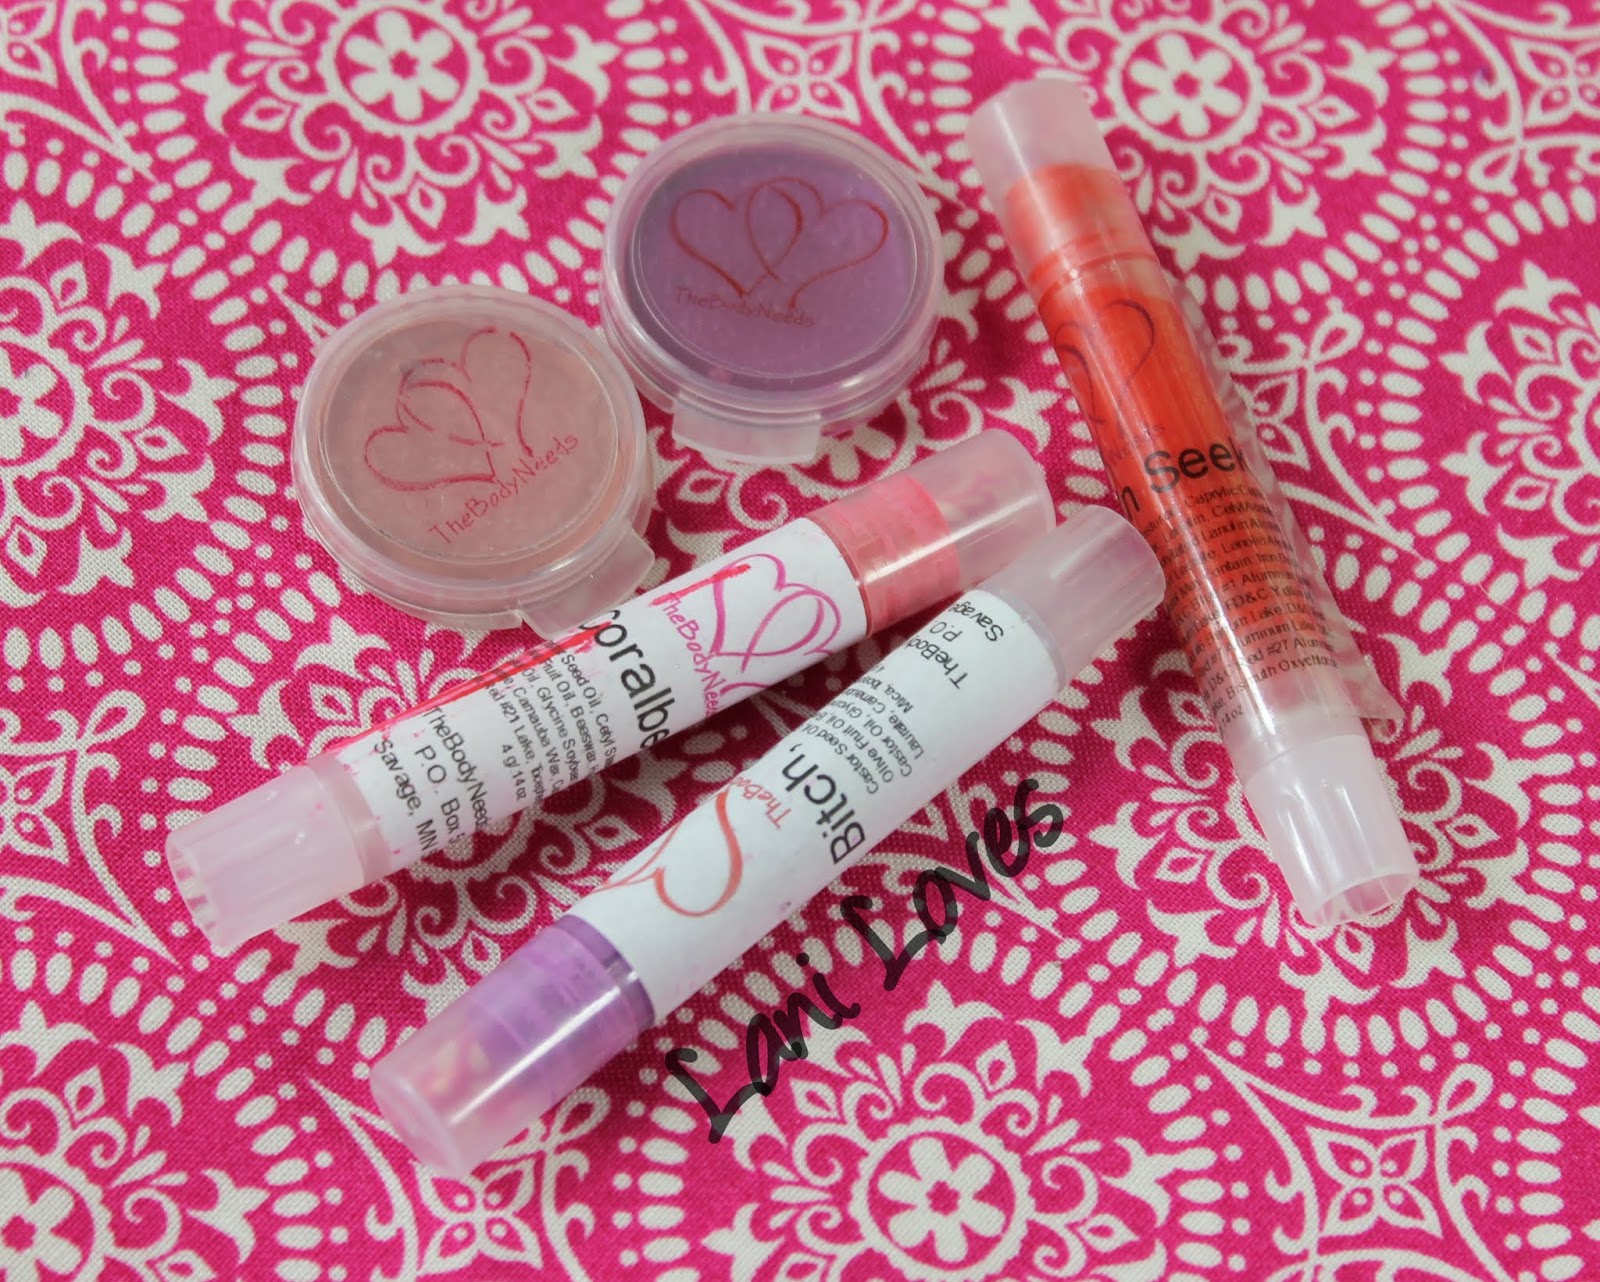 TheBodyNeeds Lip Lustre - Bitch, Please!, Coralberry, Hide 'N Seek, Forget Him! and Cupid's Crush Swatches & Review